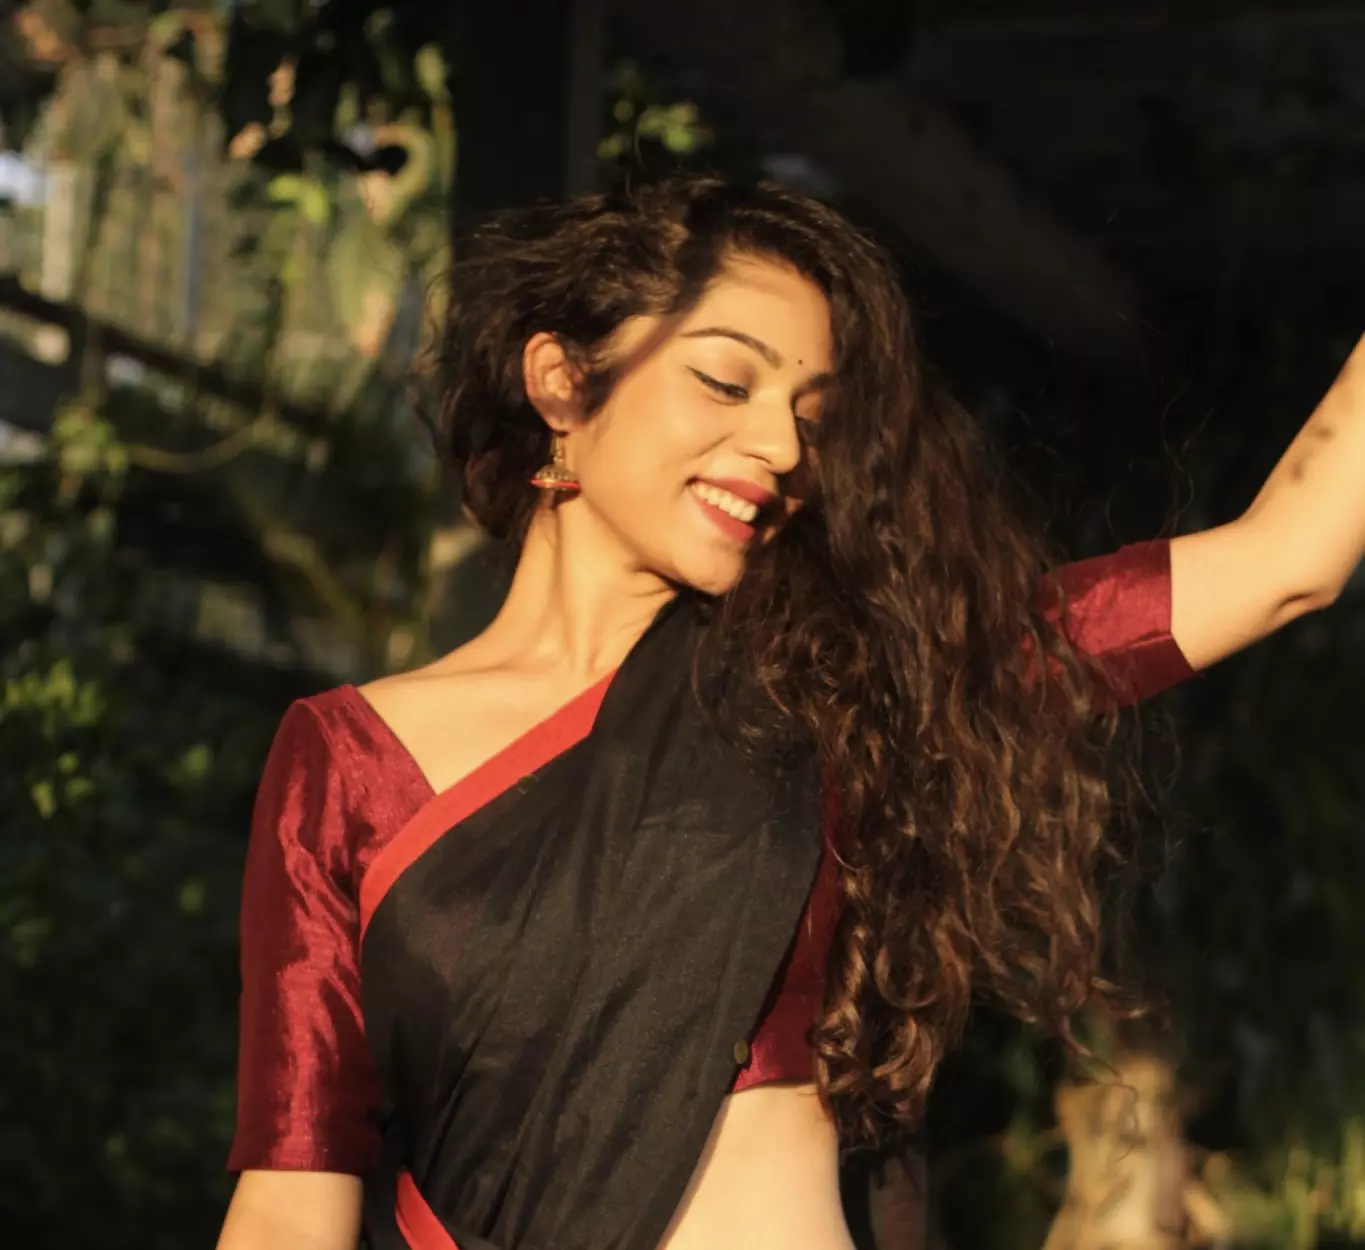 In Pics: Varsha Bollamma revs up the hotness quotient with a smile